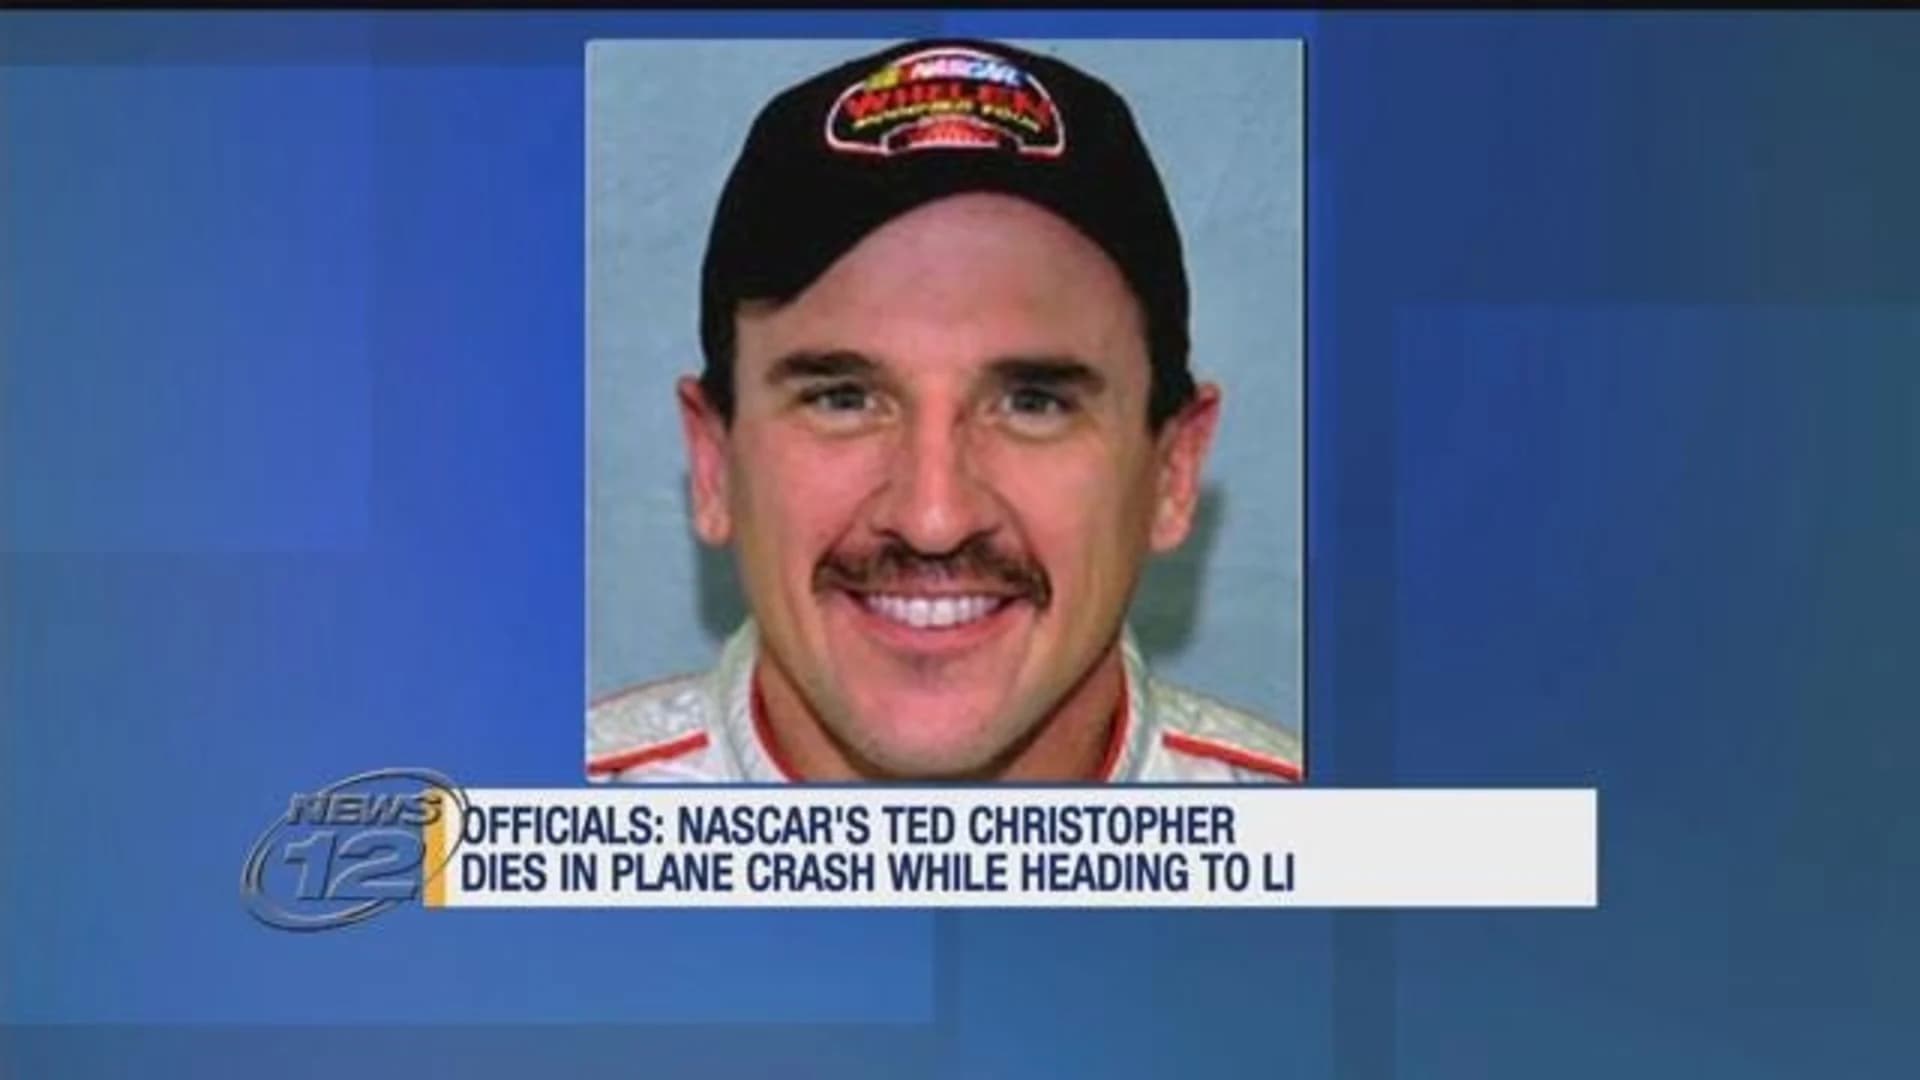 Officials: NASCAR's Ted Christopher dies in plane crash heading to LI